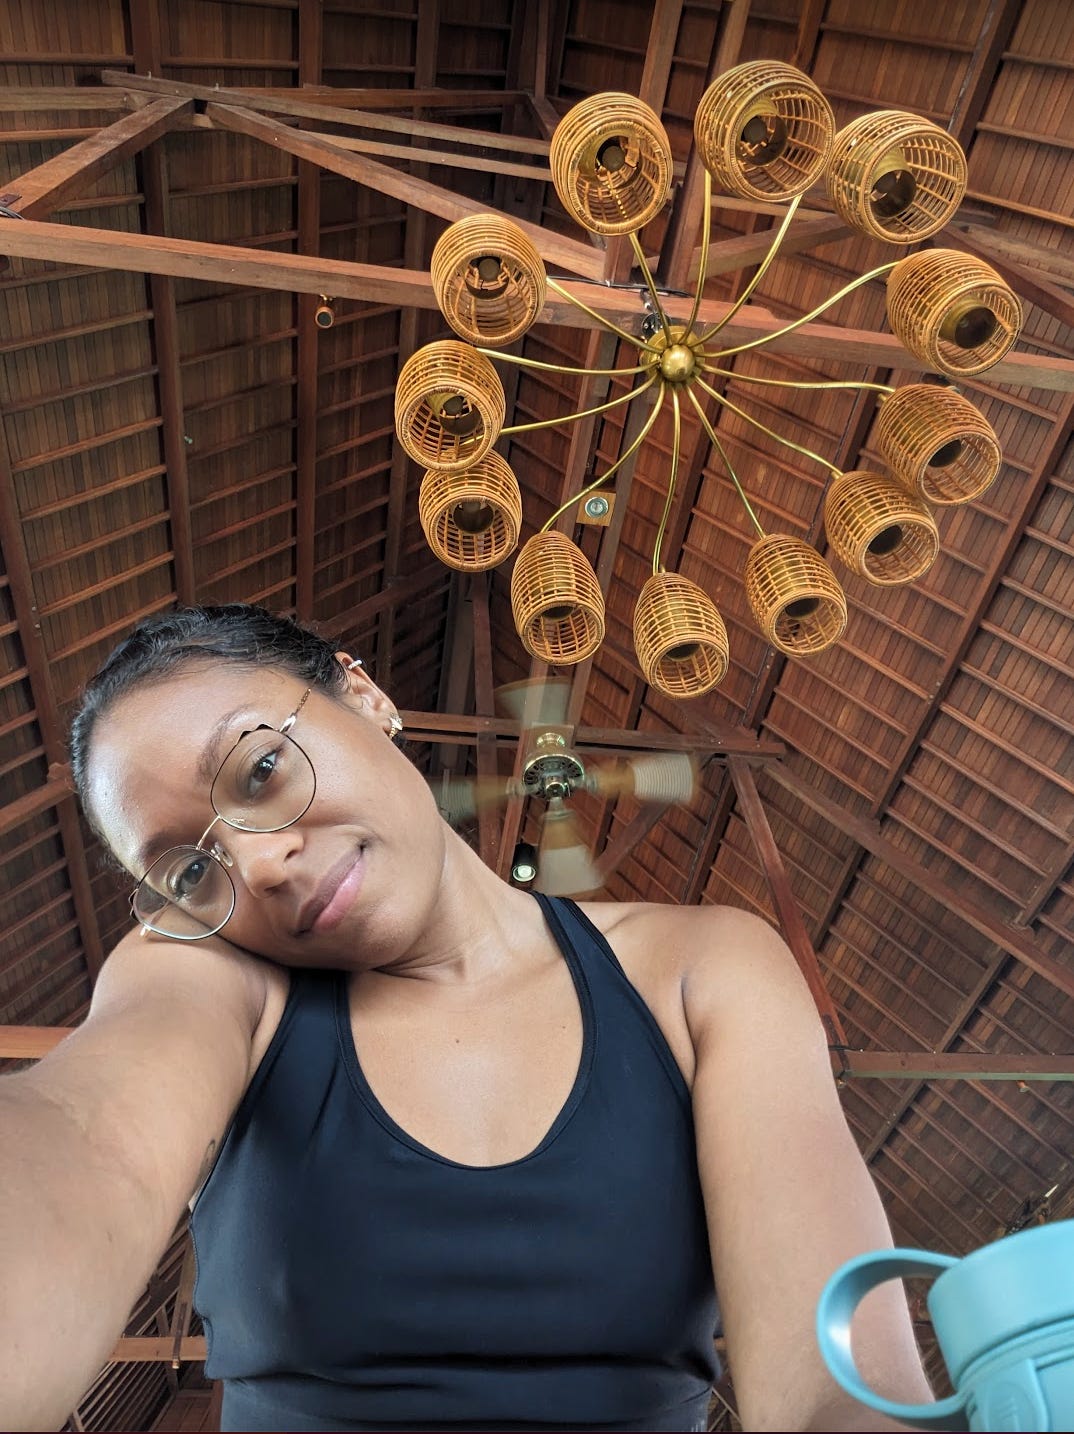 Nathalie is sitting under a wooden chandelier. She is smiling slightly at the camera while one side of her face is leaning on her shoulder.